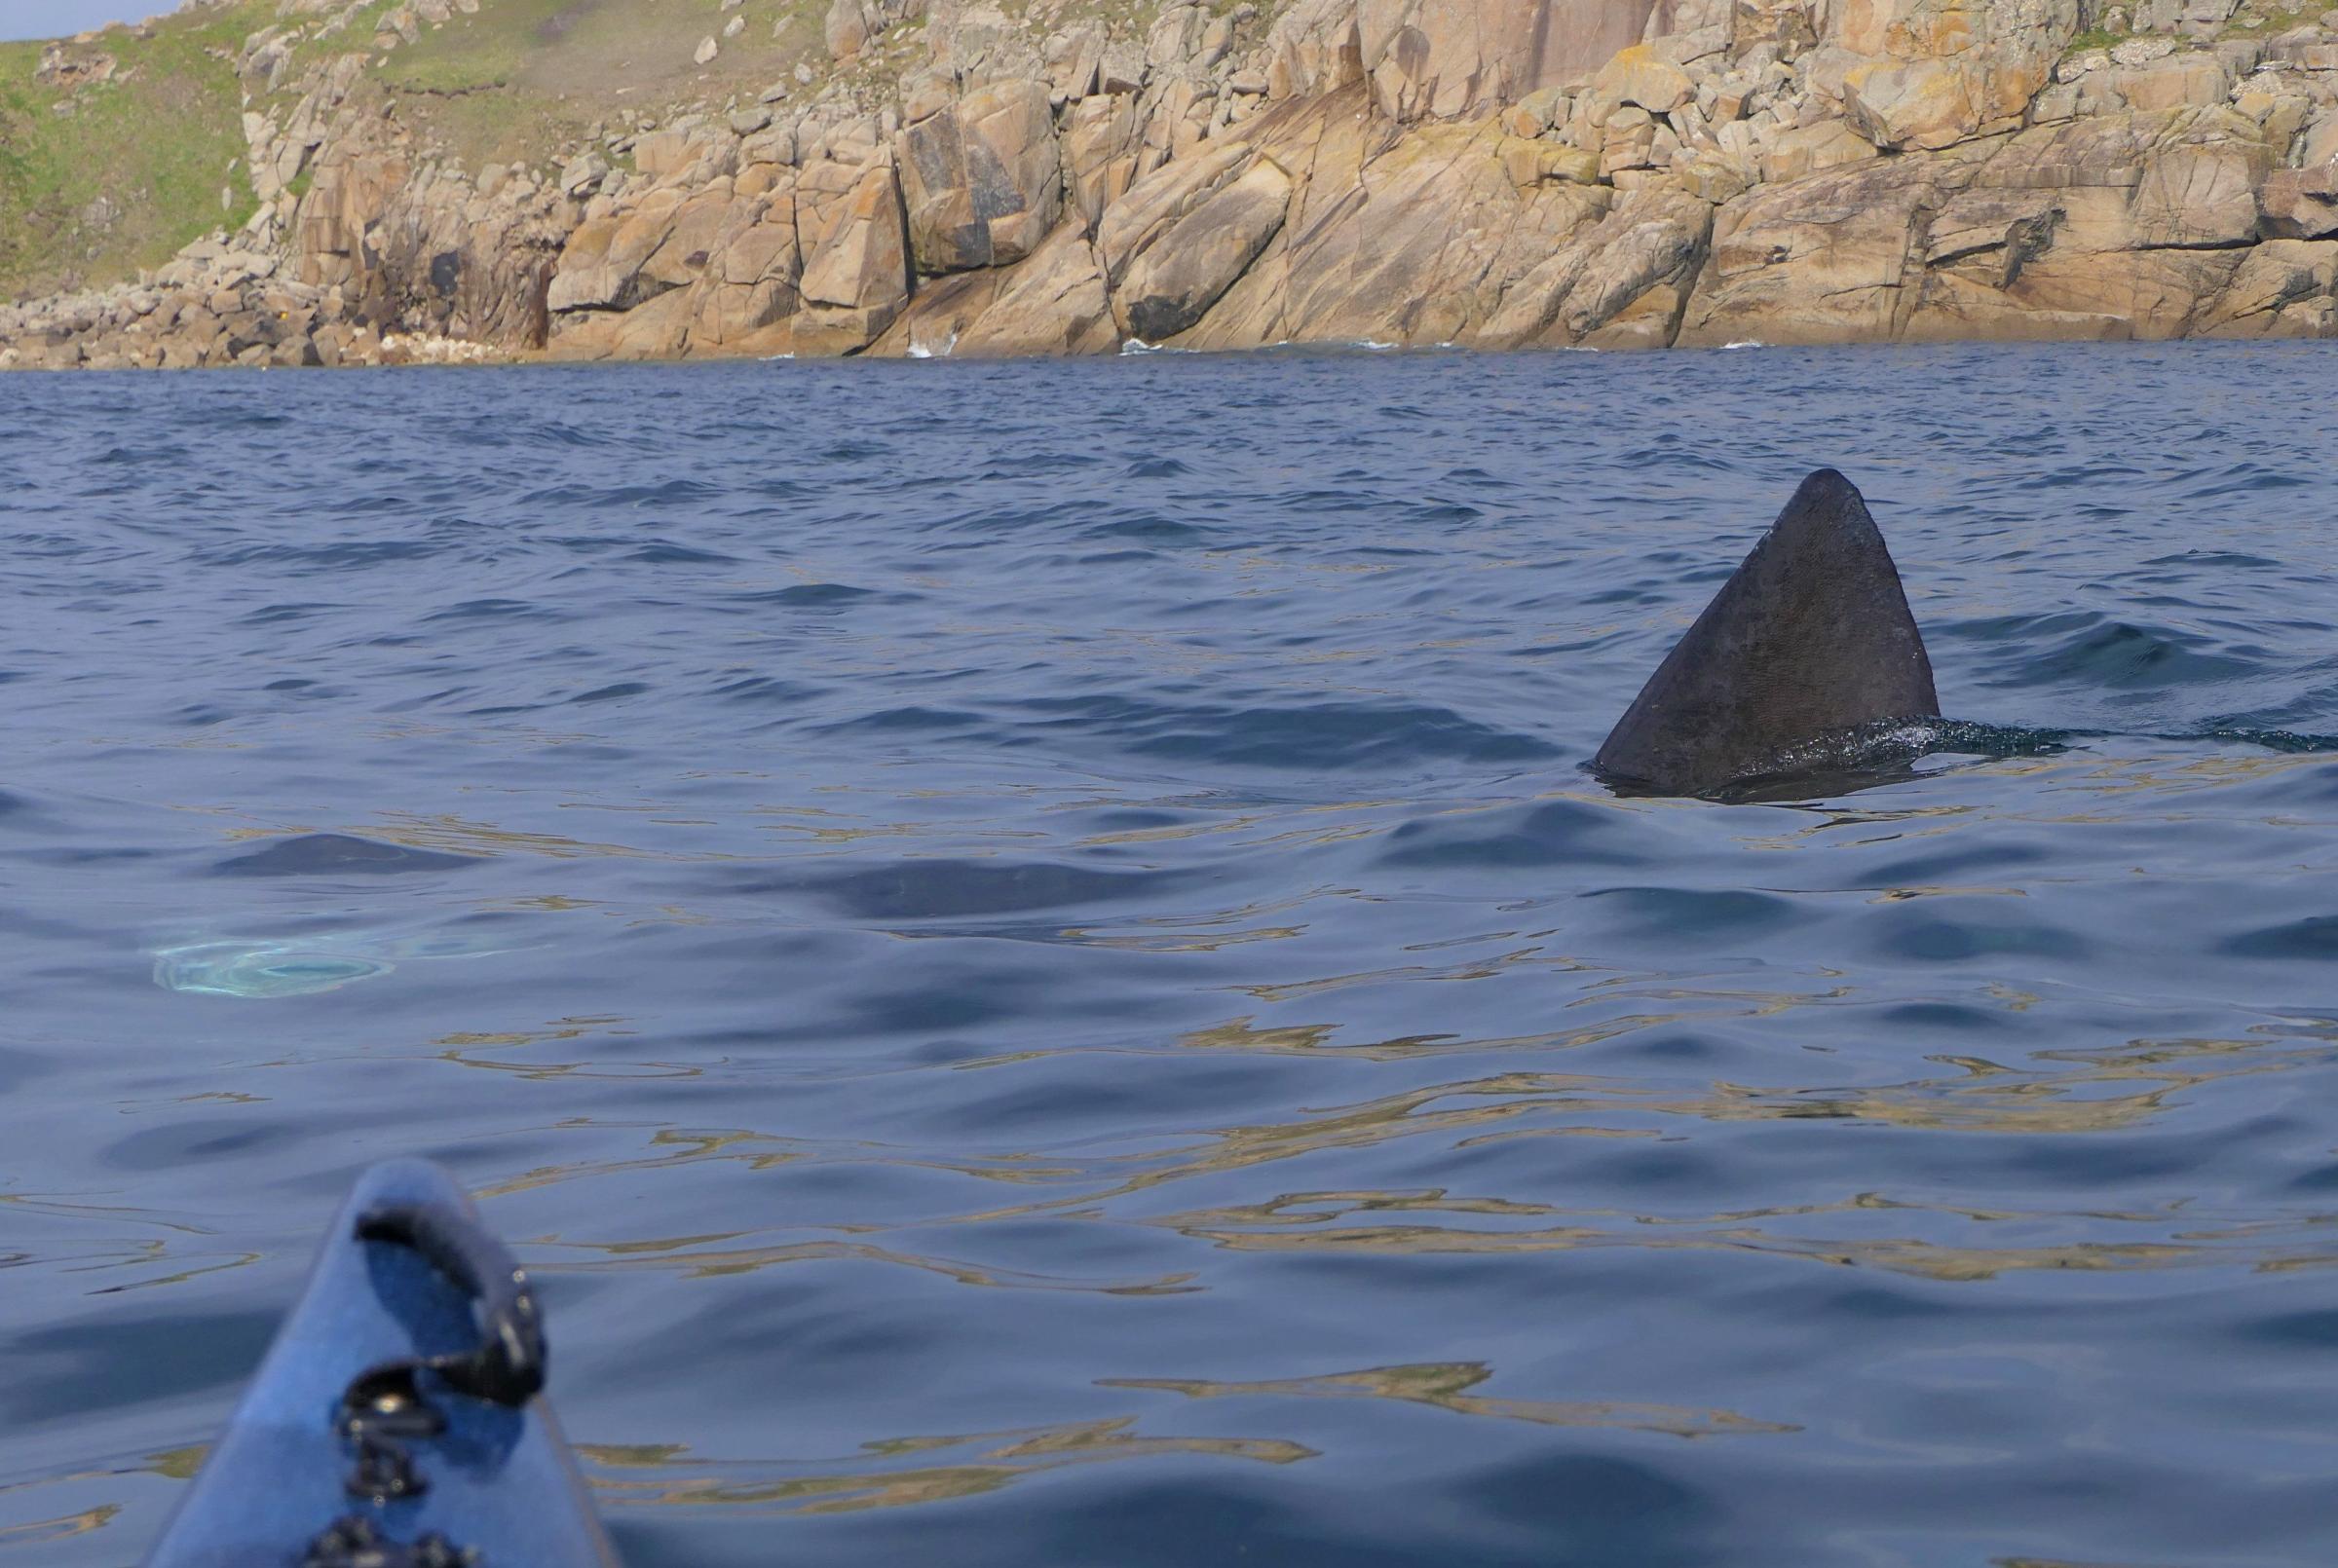 The sharks were spotted off Lands End. Picture: Rupert Kirkwood / SWNS